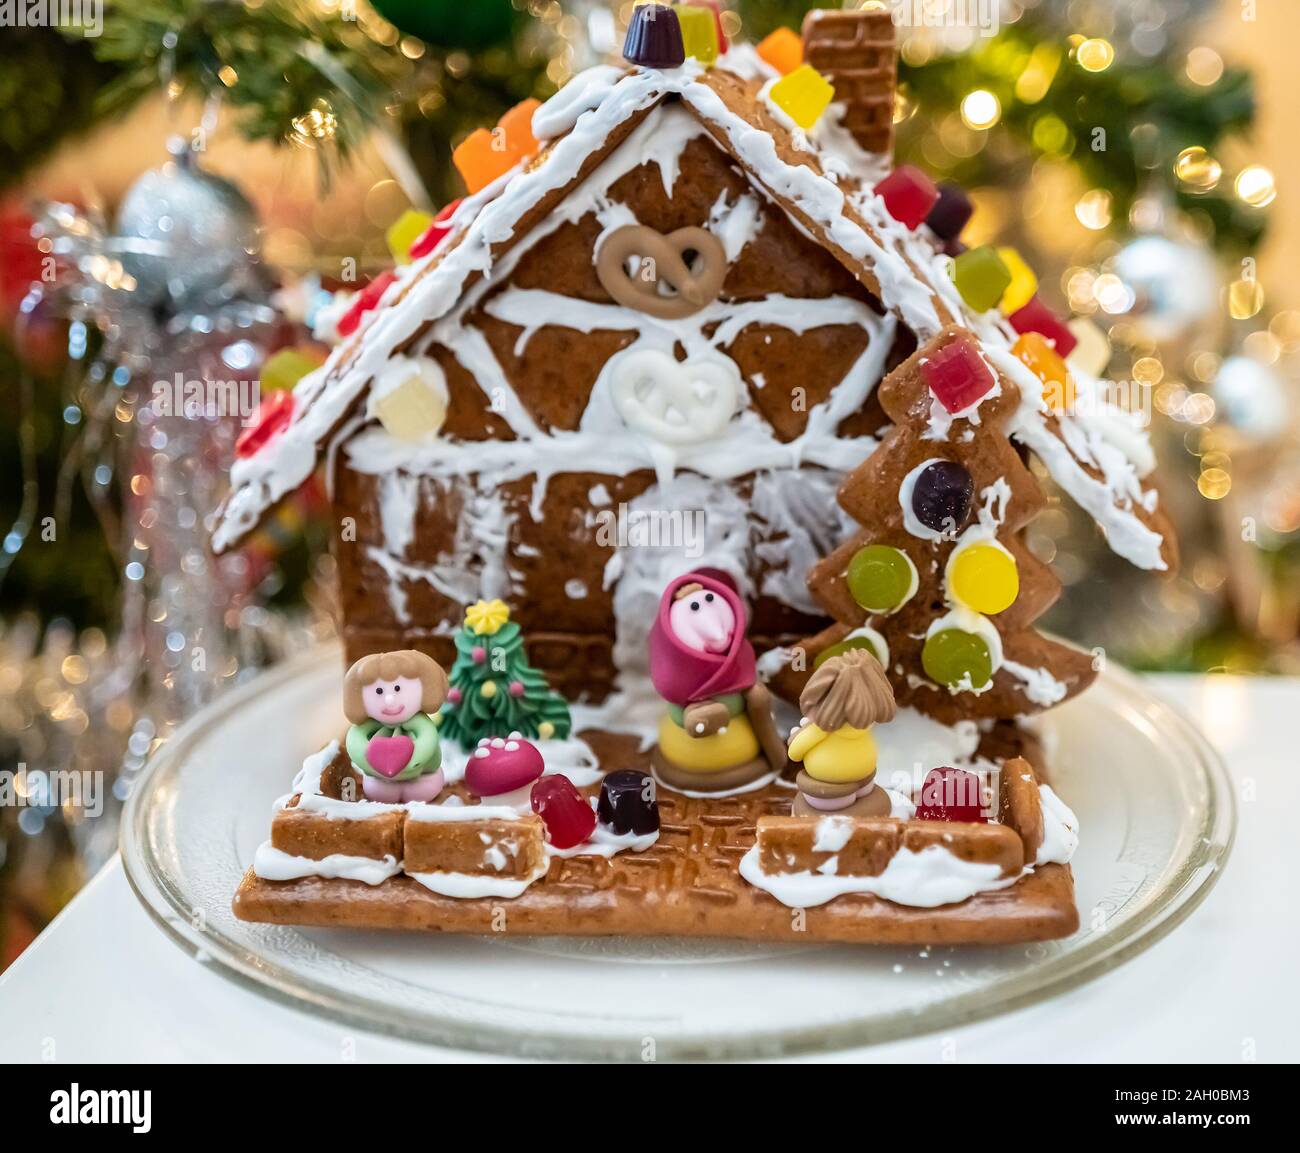 Selective focus on candy characters standing in front of a homemade and home decorated ginger bread house on a white table Stock Photo